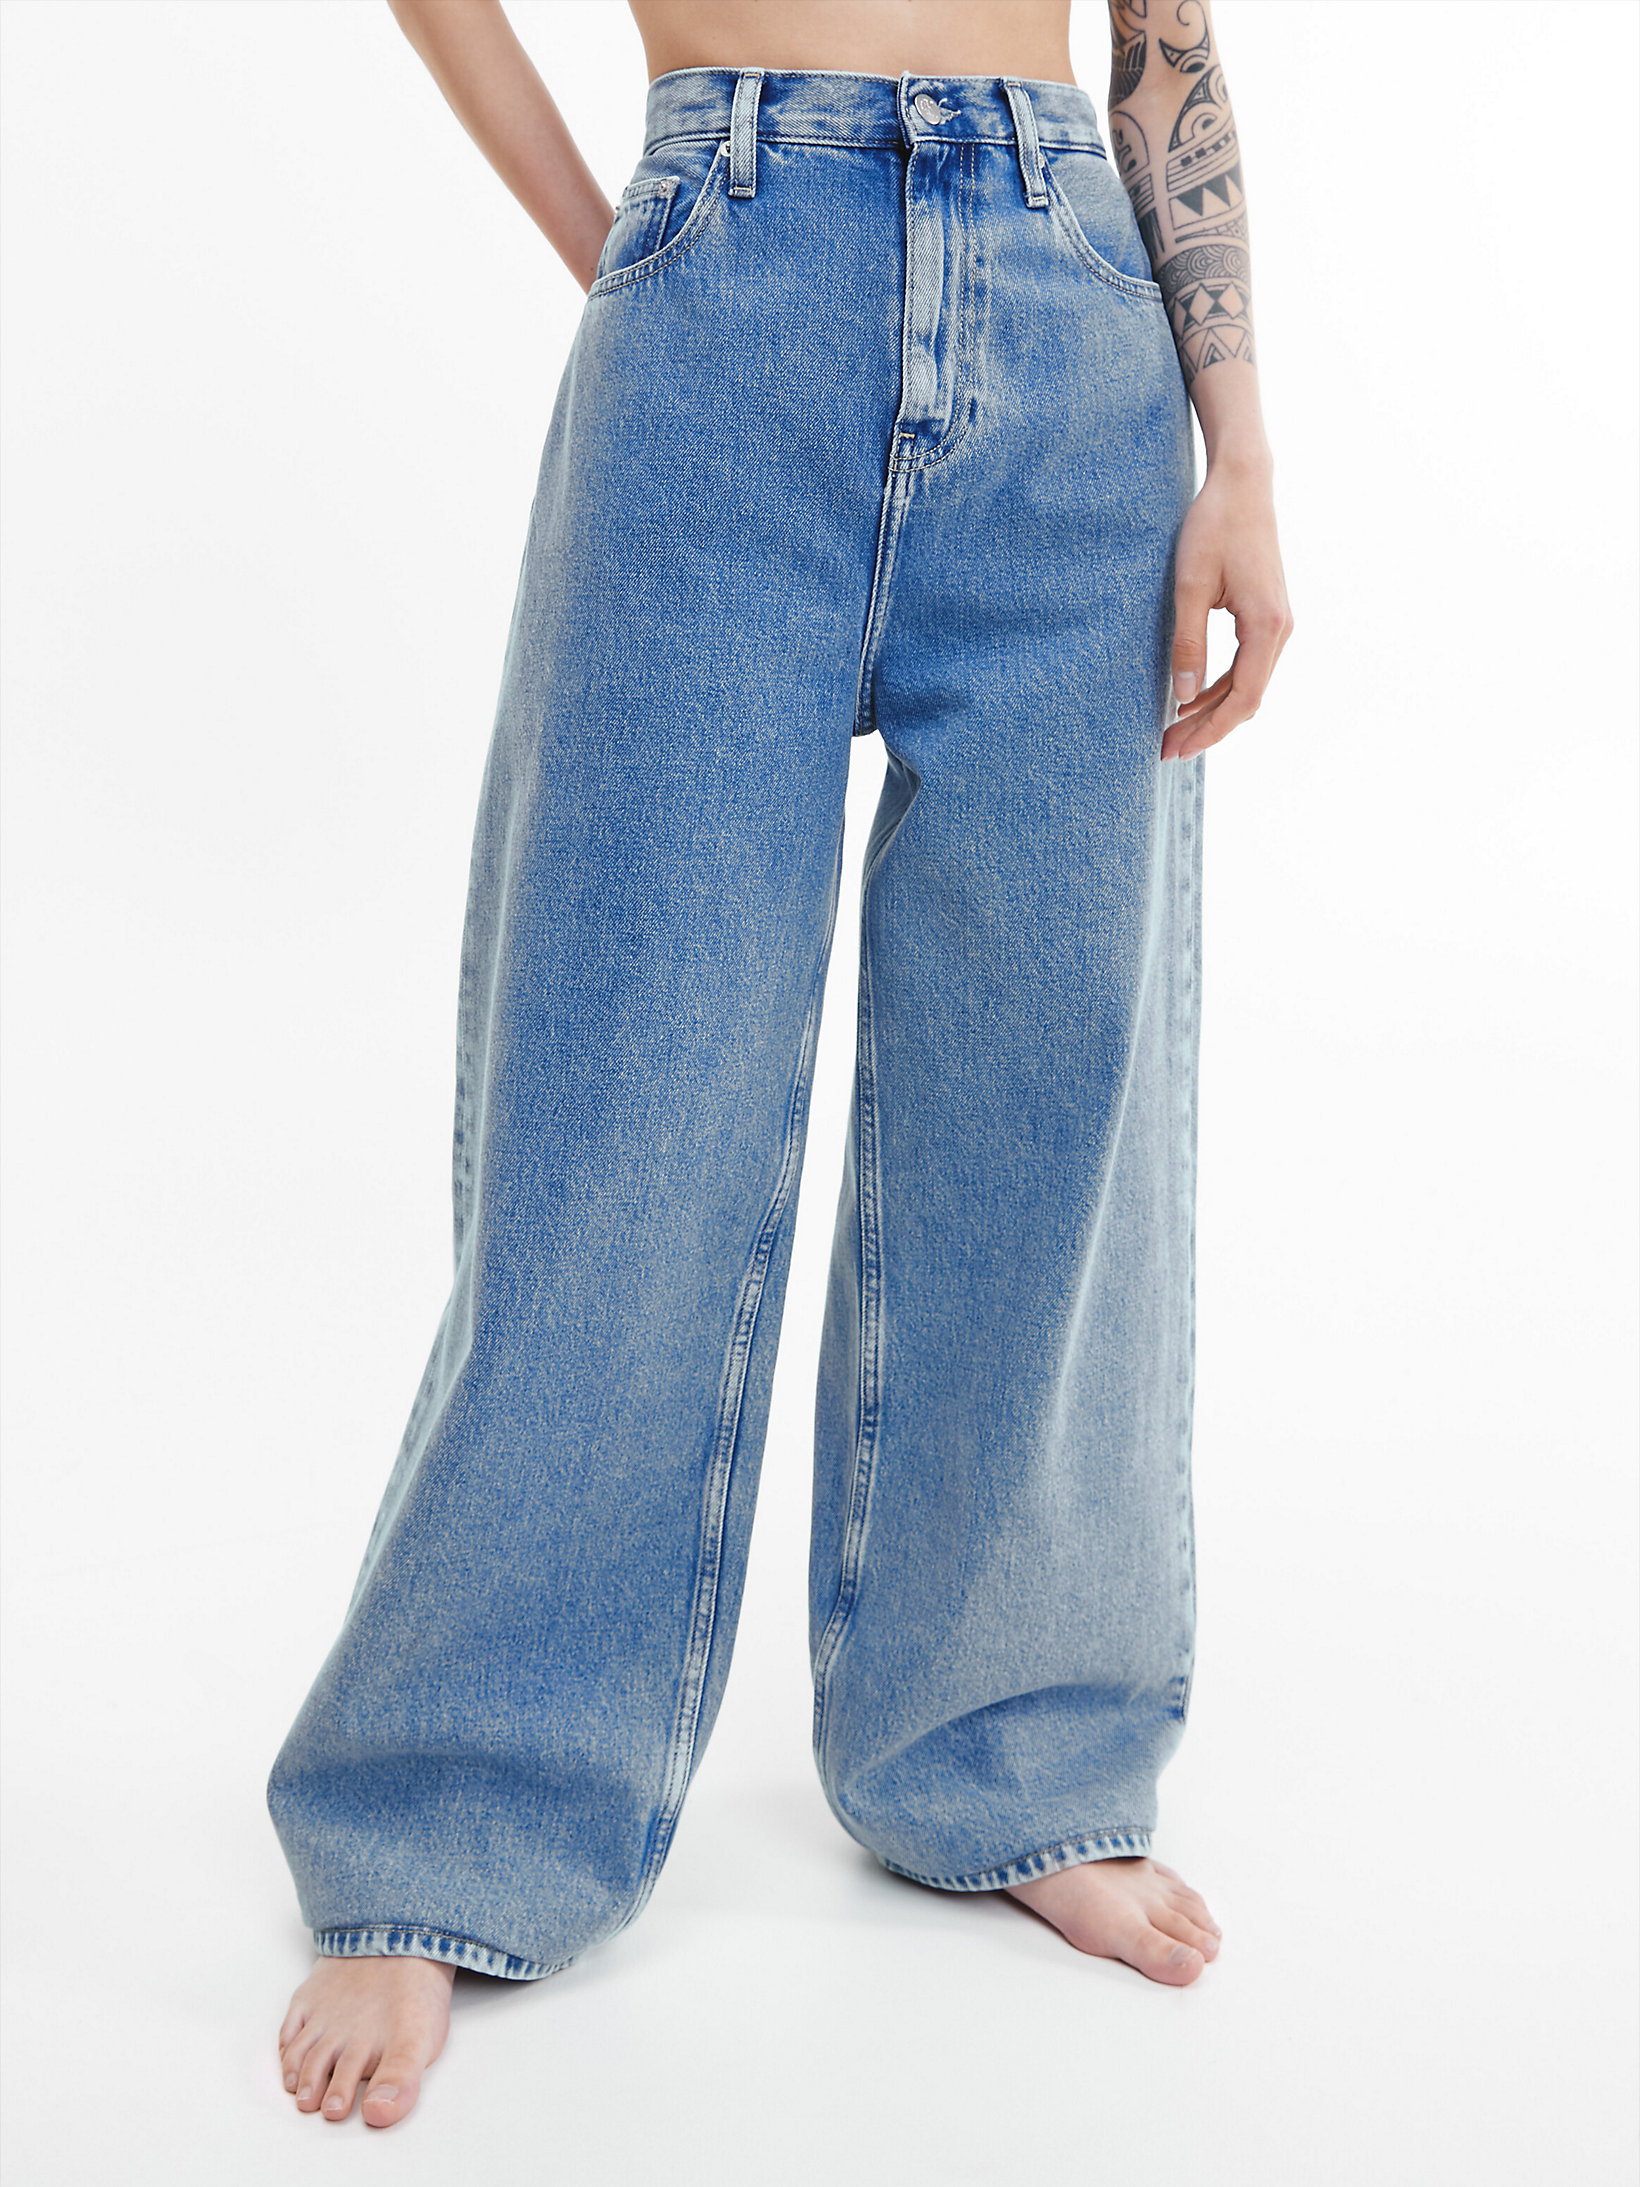 High Rise Relaxed Jeans Petite > Denim Medium > undefined mujer > Calvin Klein